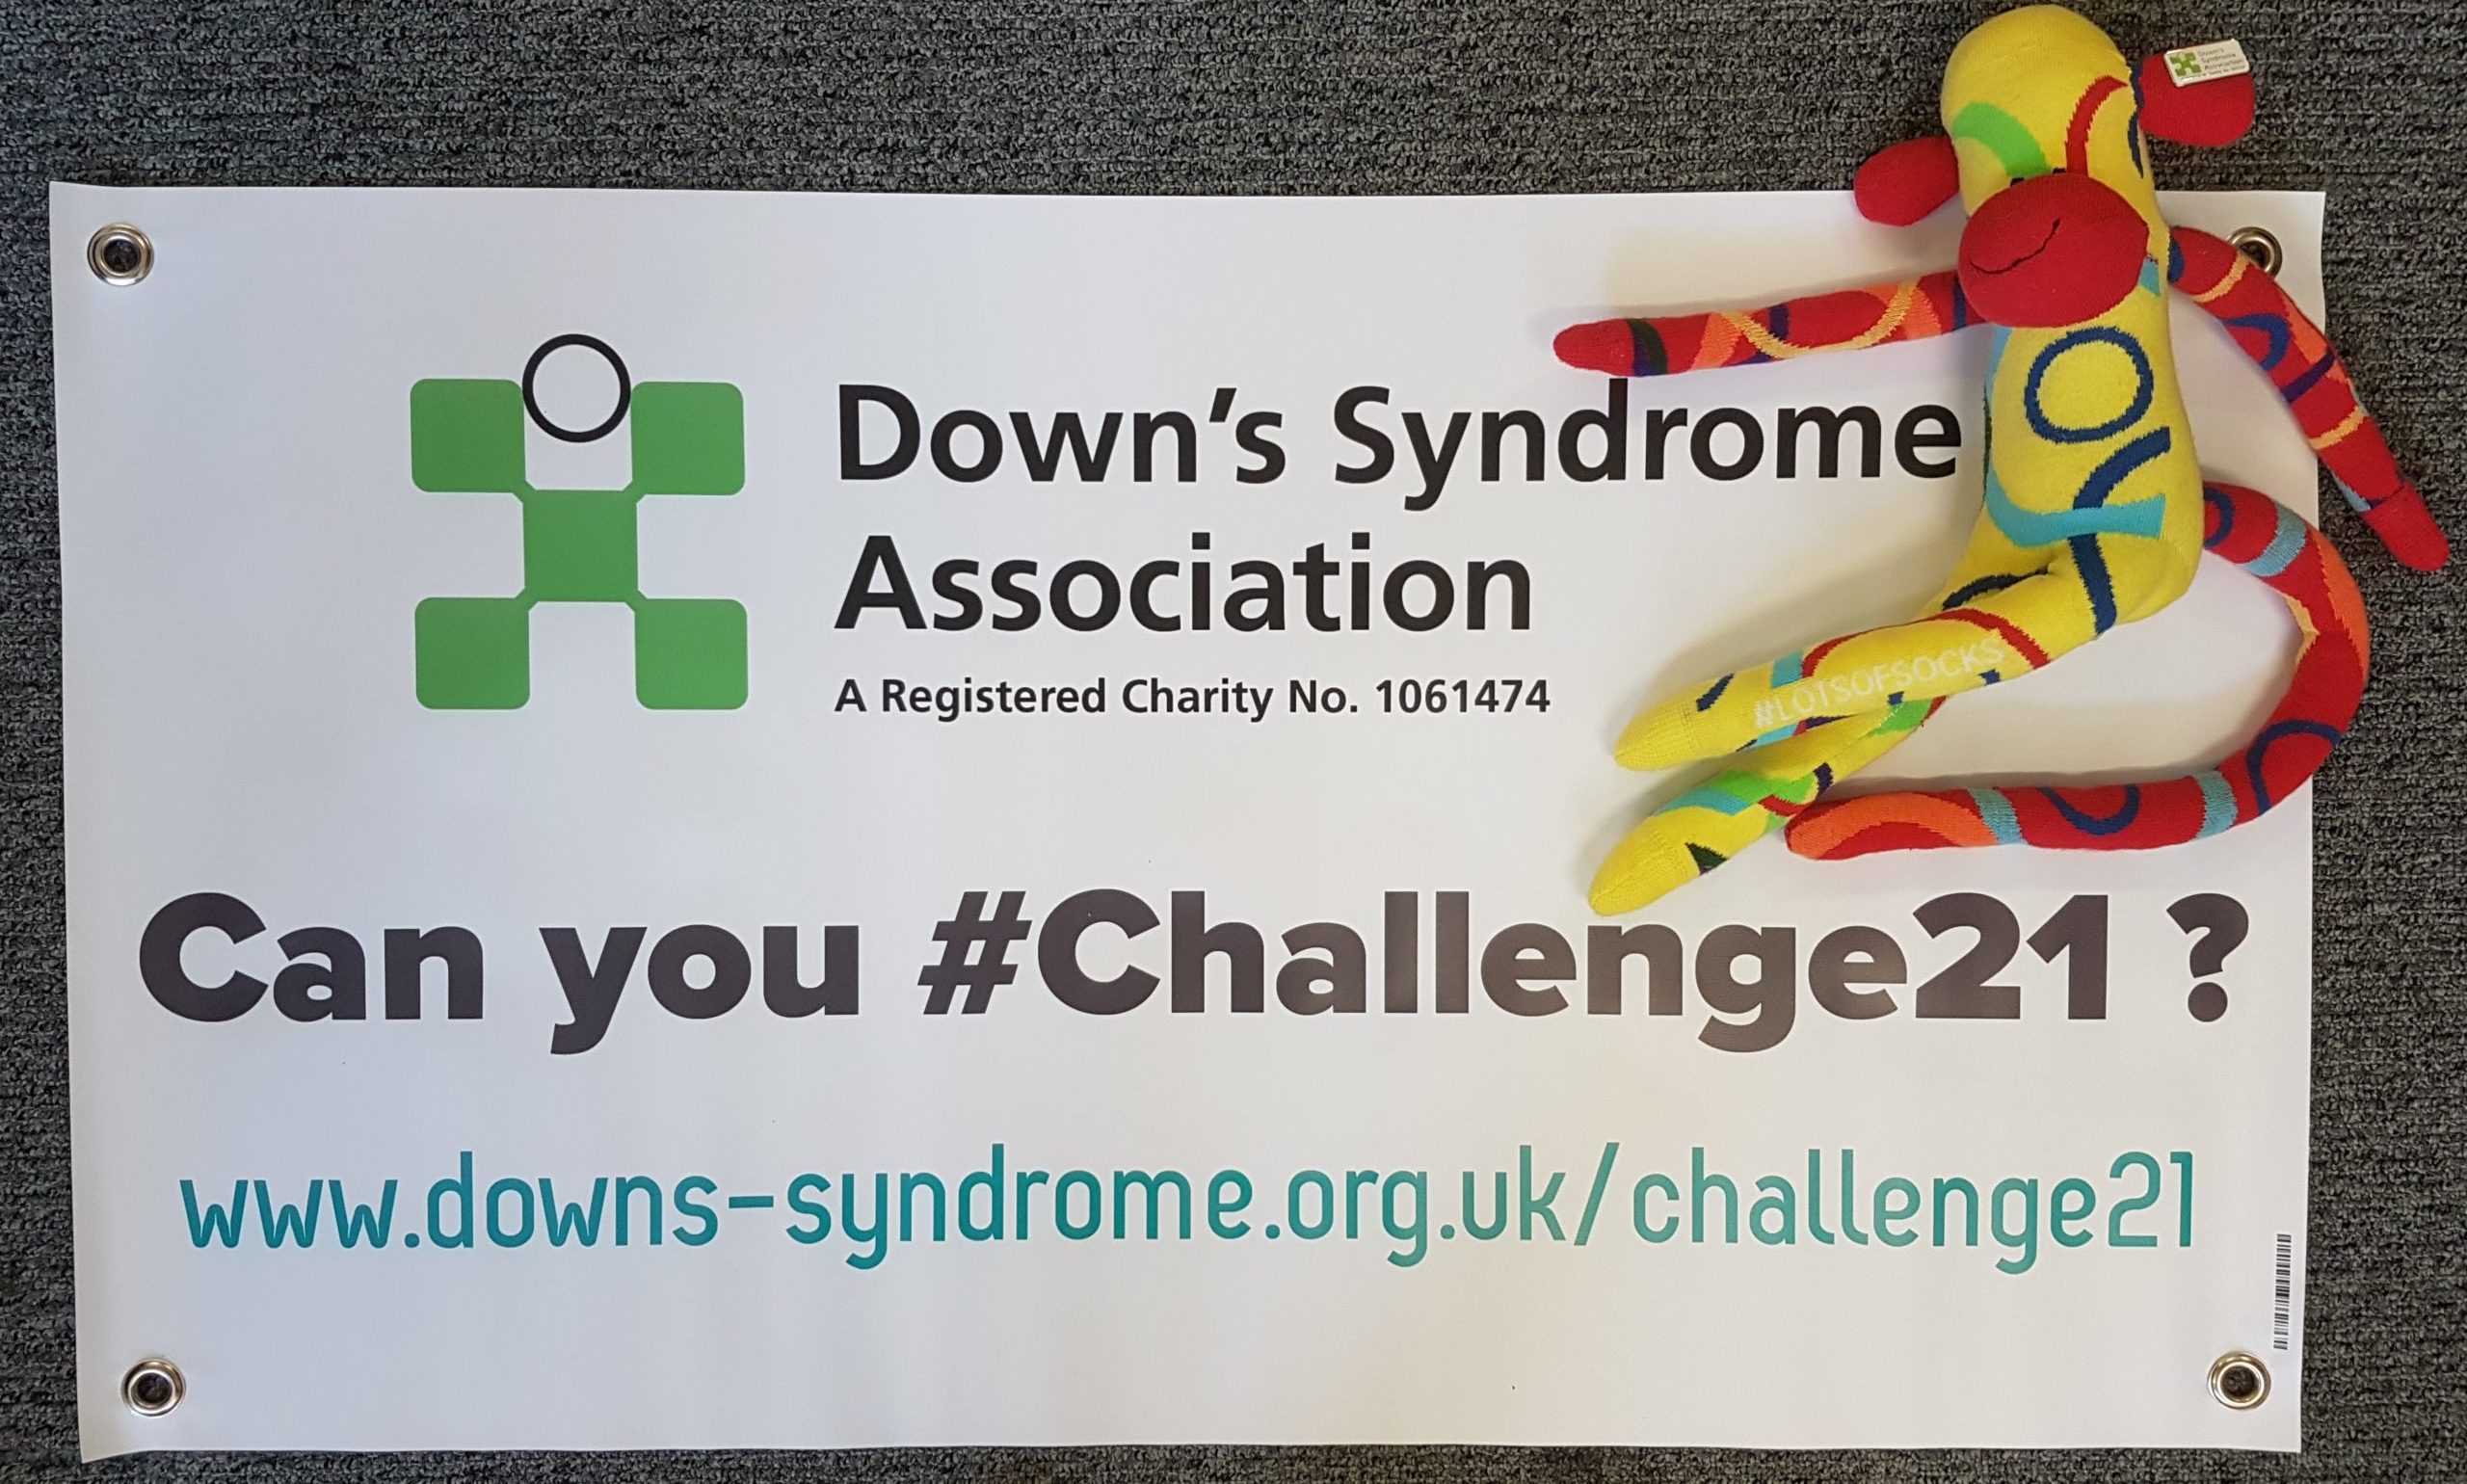 https://www.downs-syndrome.org.uk/wp-content/uploads/2021/02/Frank-and-Challenge-21-Photo-scaled-e1612195902557.jpg